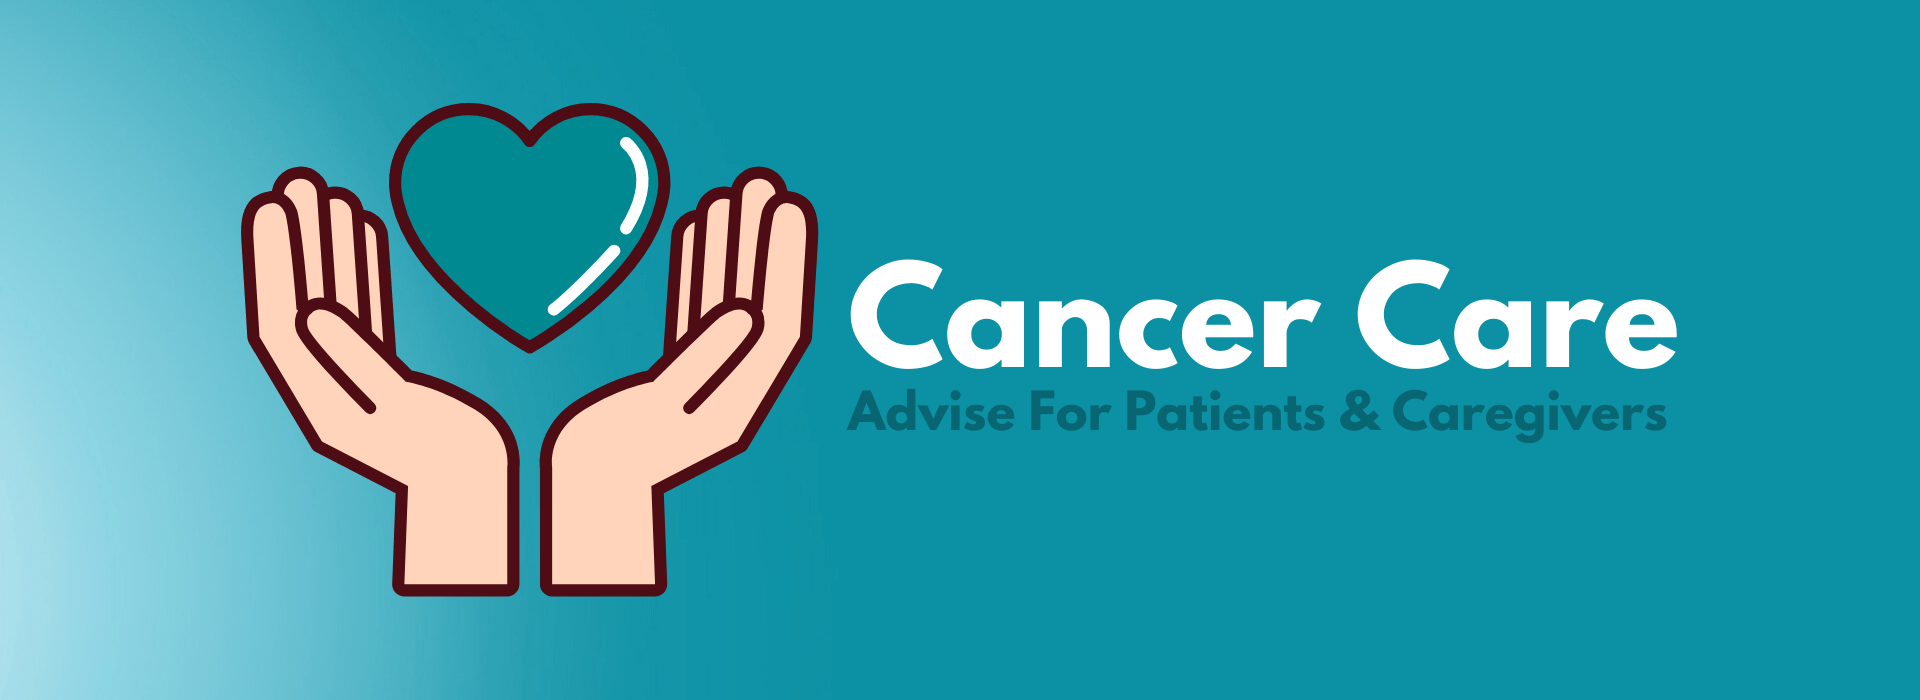 Cancer Care - Advice for patients and caregivers - Caped India